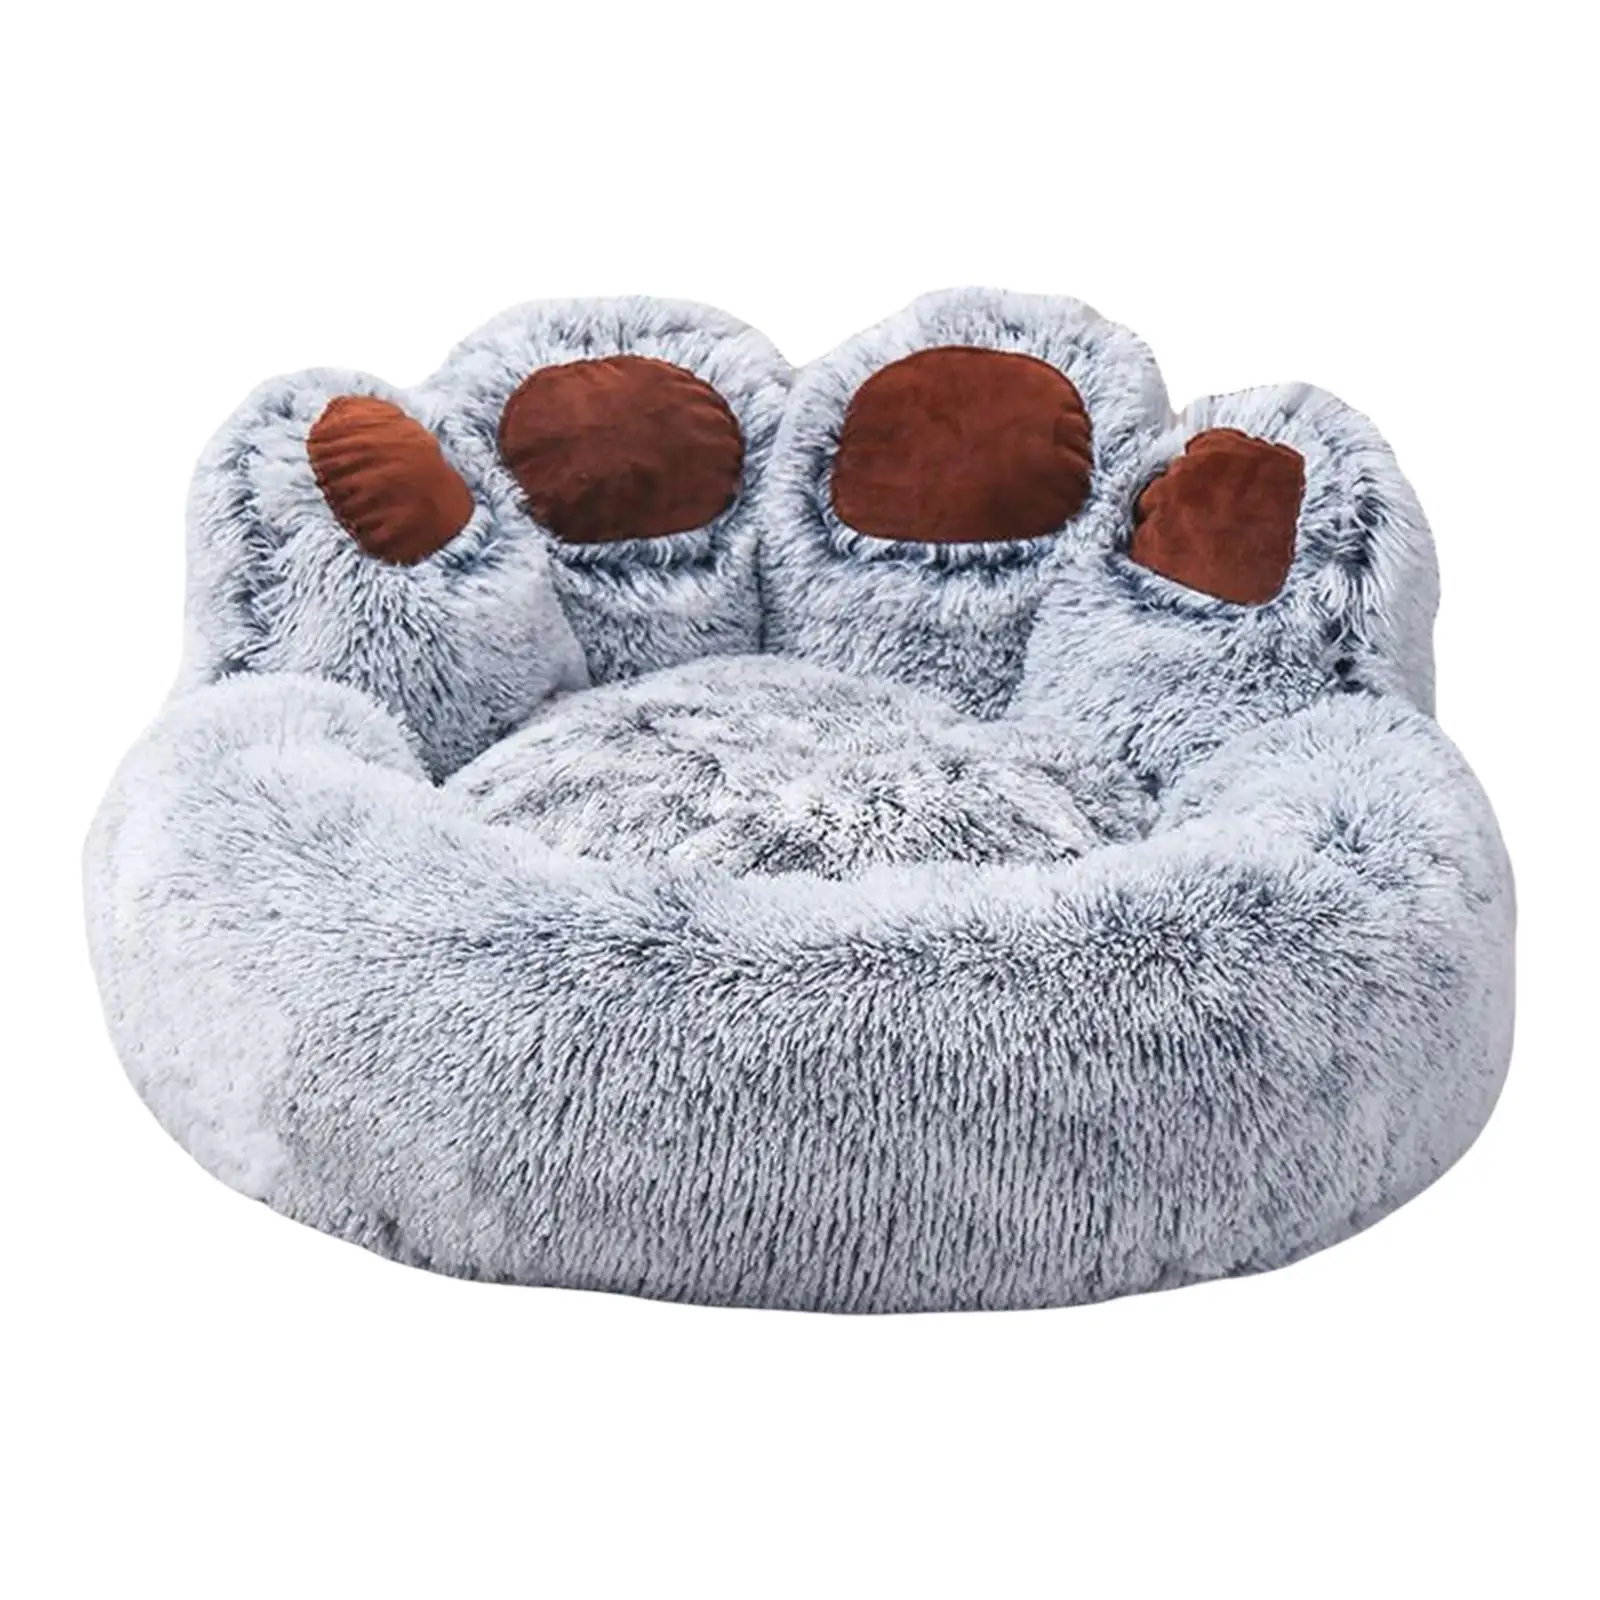 Warm House Dog Bed for Cats, Non-Slip Bottom, Hand Or Machine Washable, Soothing